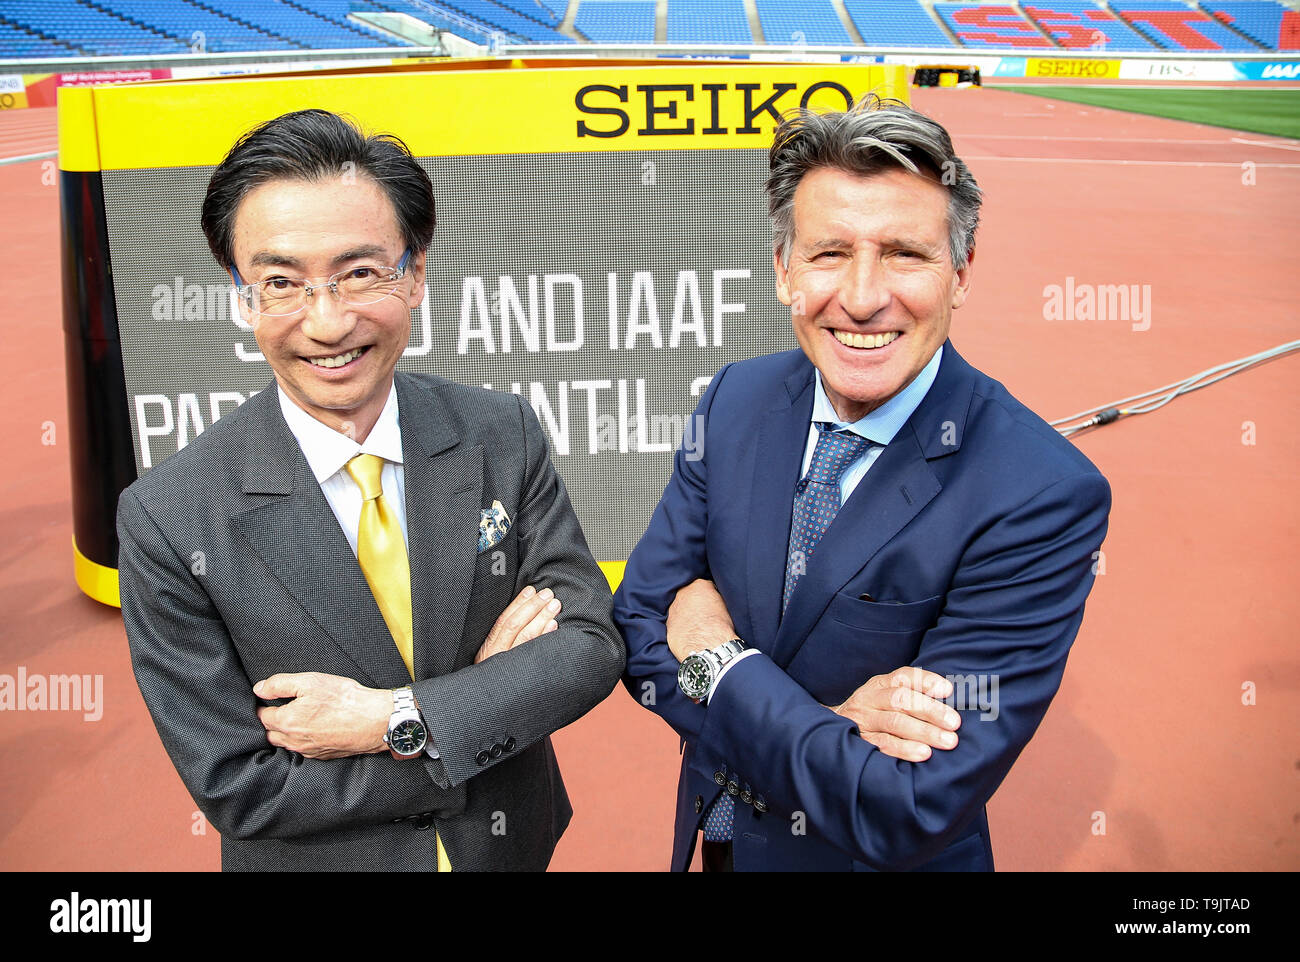 YOKOHAMA, JAPAN - MAY 10: The CEO of Seiko, Mr Shinji Hattori and the IAAF  President Sebastian Coe during the official Seiko announcement at the 2019  IAAF World Relay Championships at the